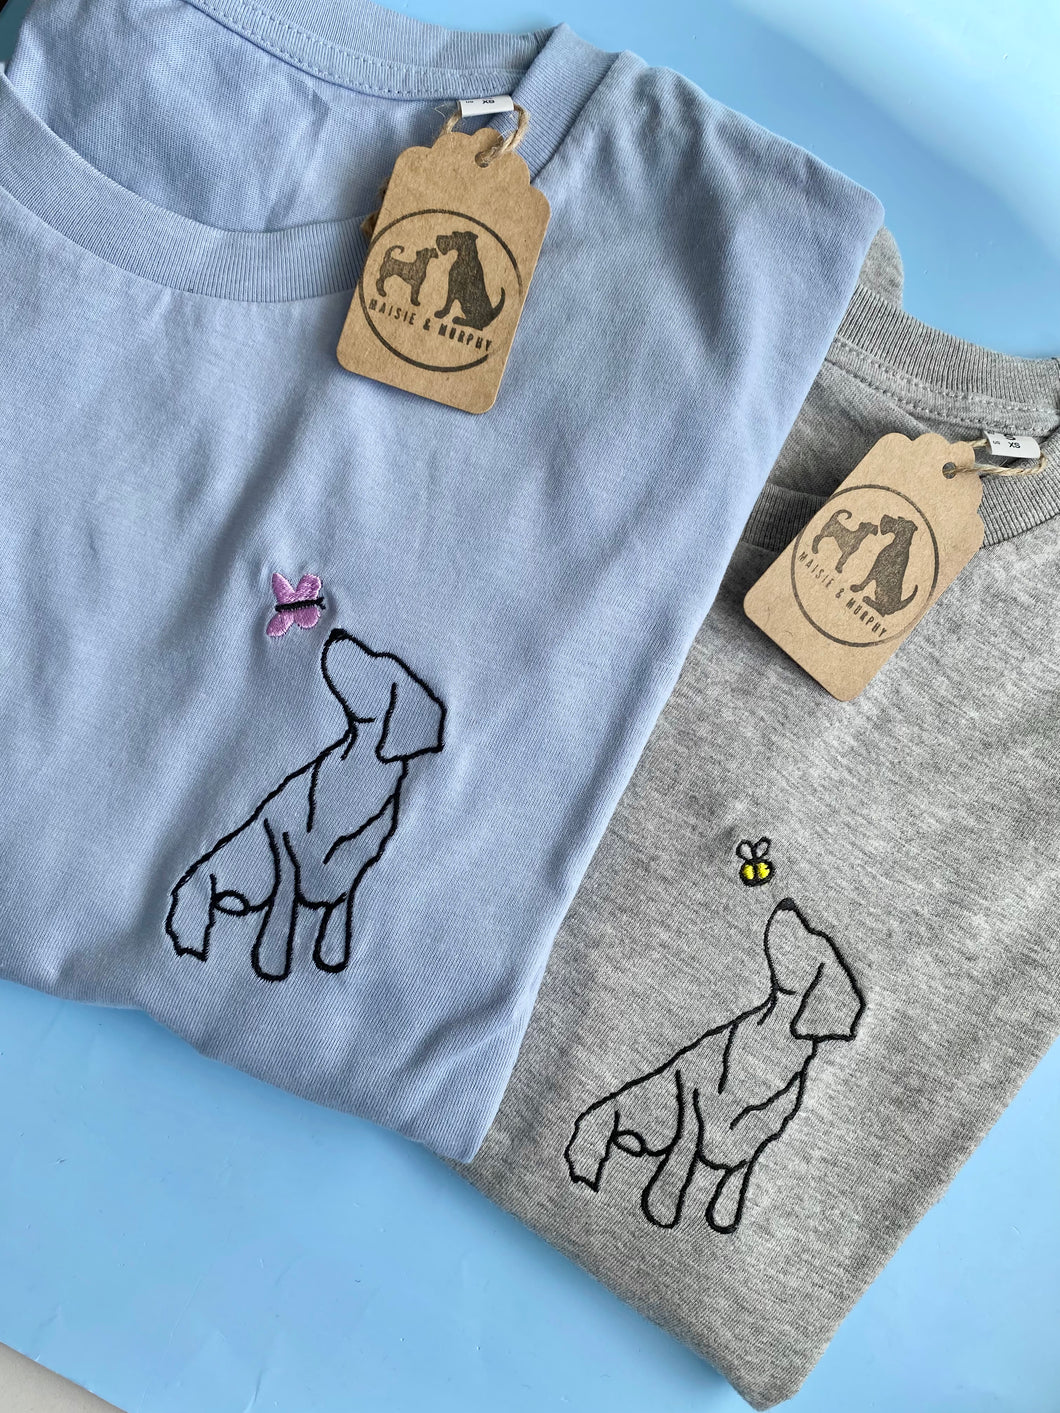 Cocker Spaniel Outline T-shirt - embroidered spaniel organic tee for dog lovers and owners